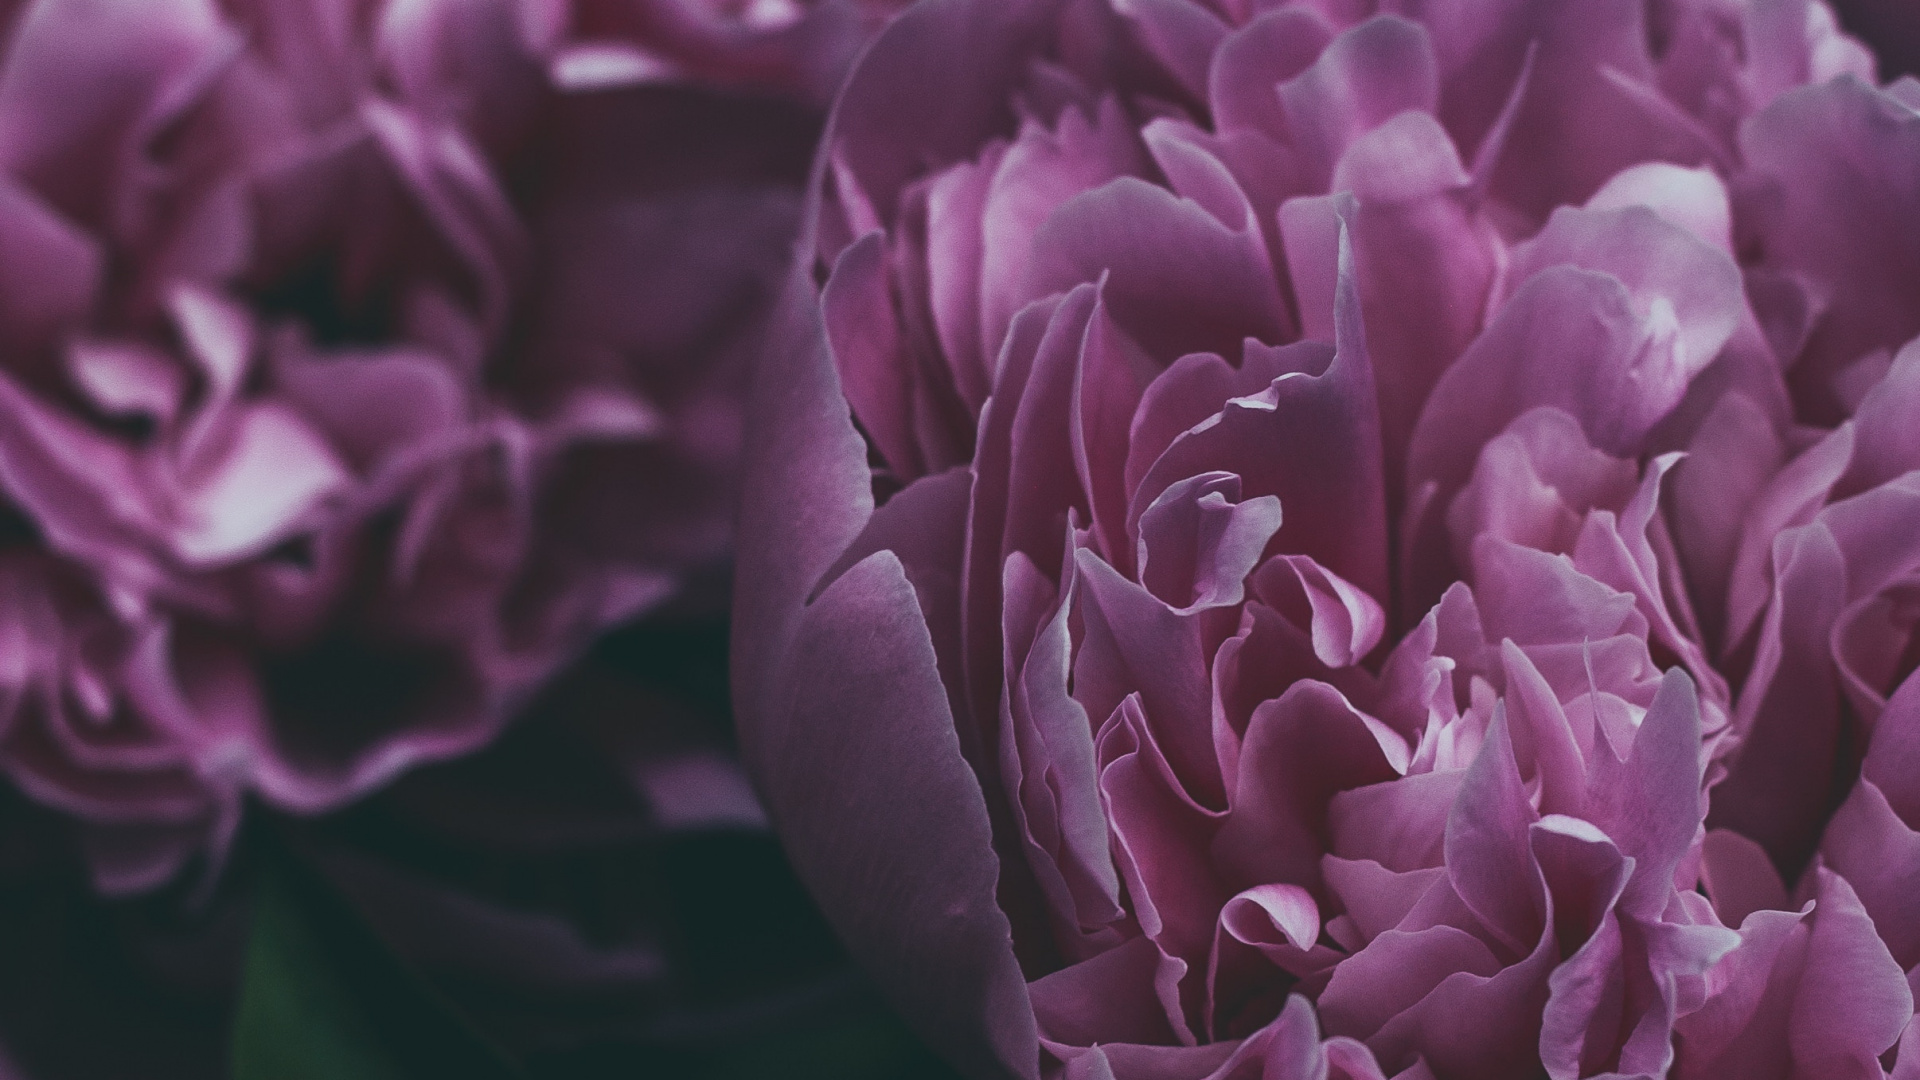 Purple Flower in Close up Photography. Wallpaper in 1920x1080 Resolution